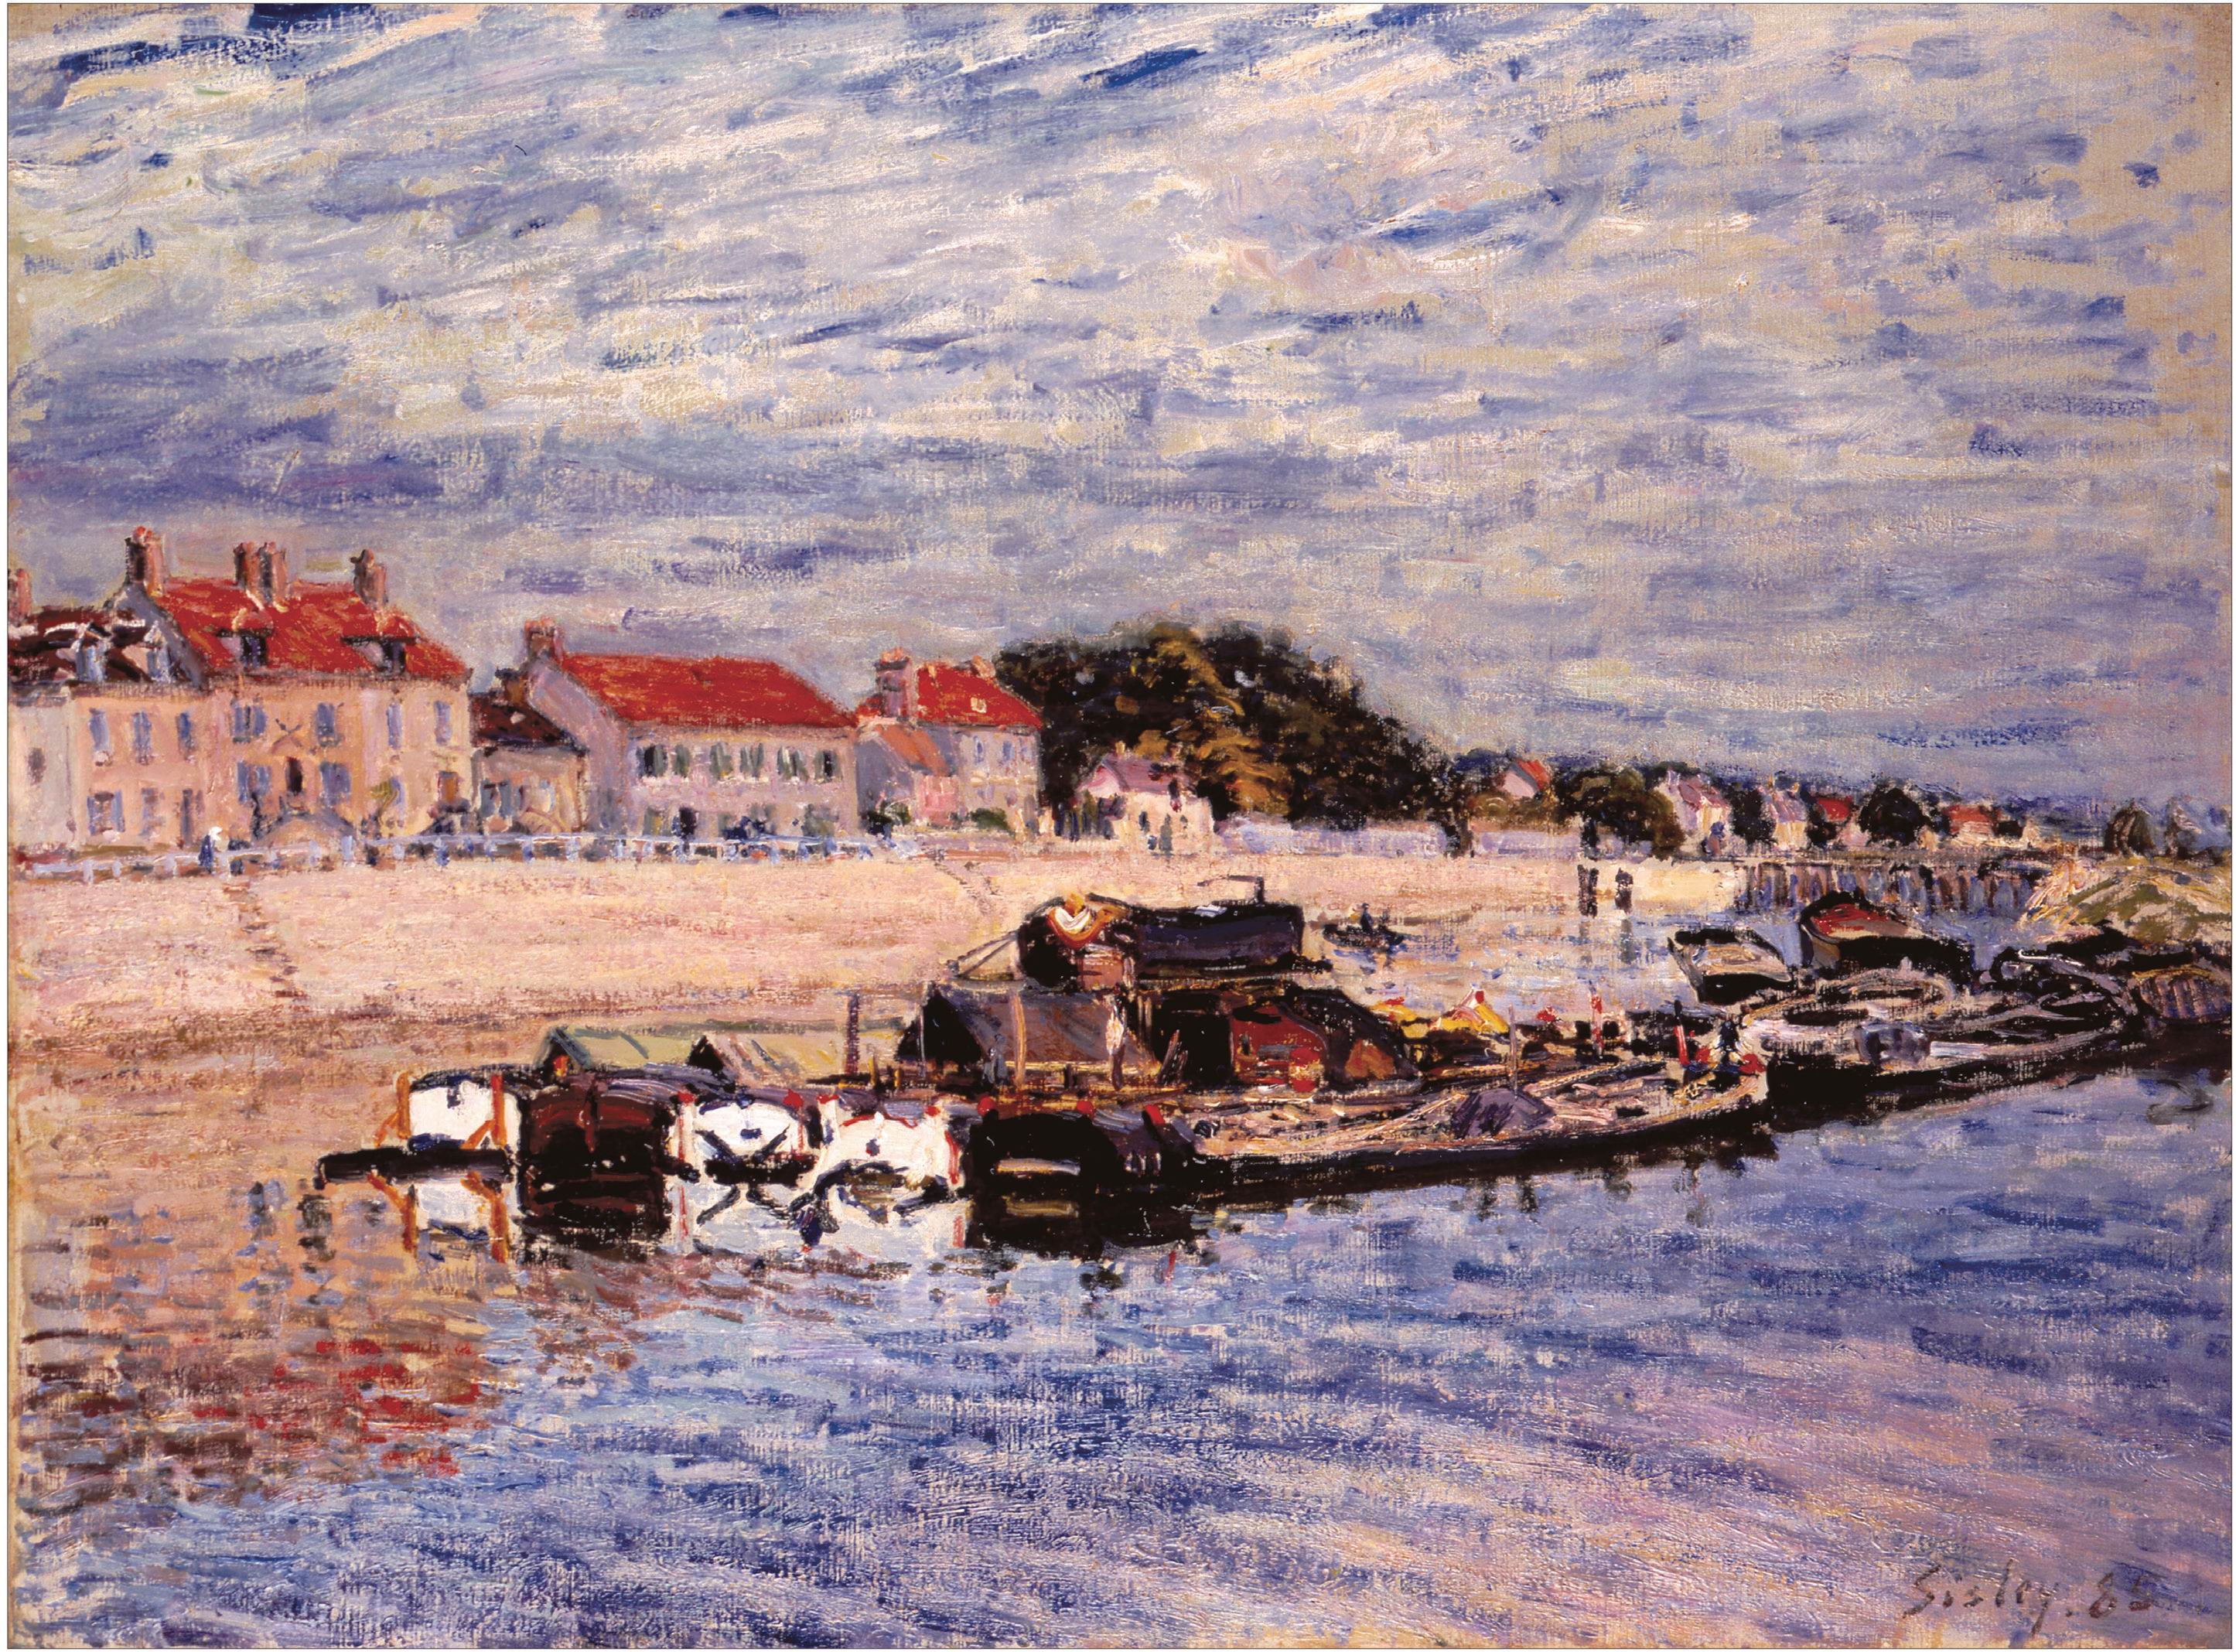 Oil Painting Oil On Canvas Alfred Sisley Banks Artwork Classical Art Water Clouds Sky 2891x2136